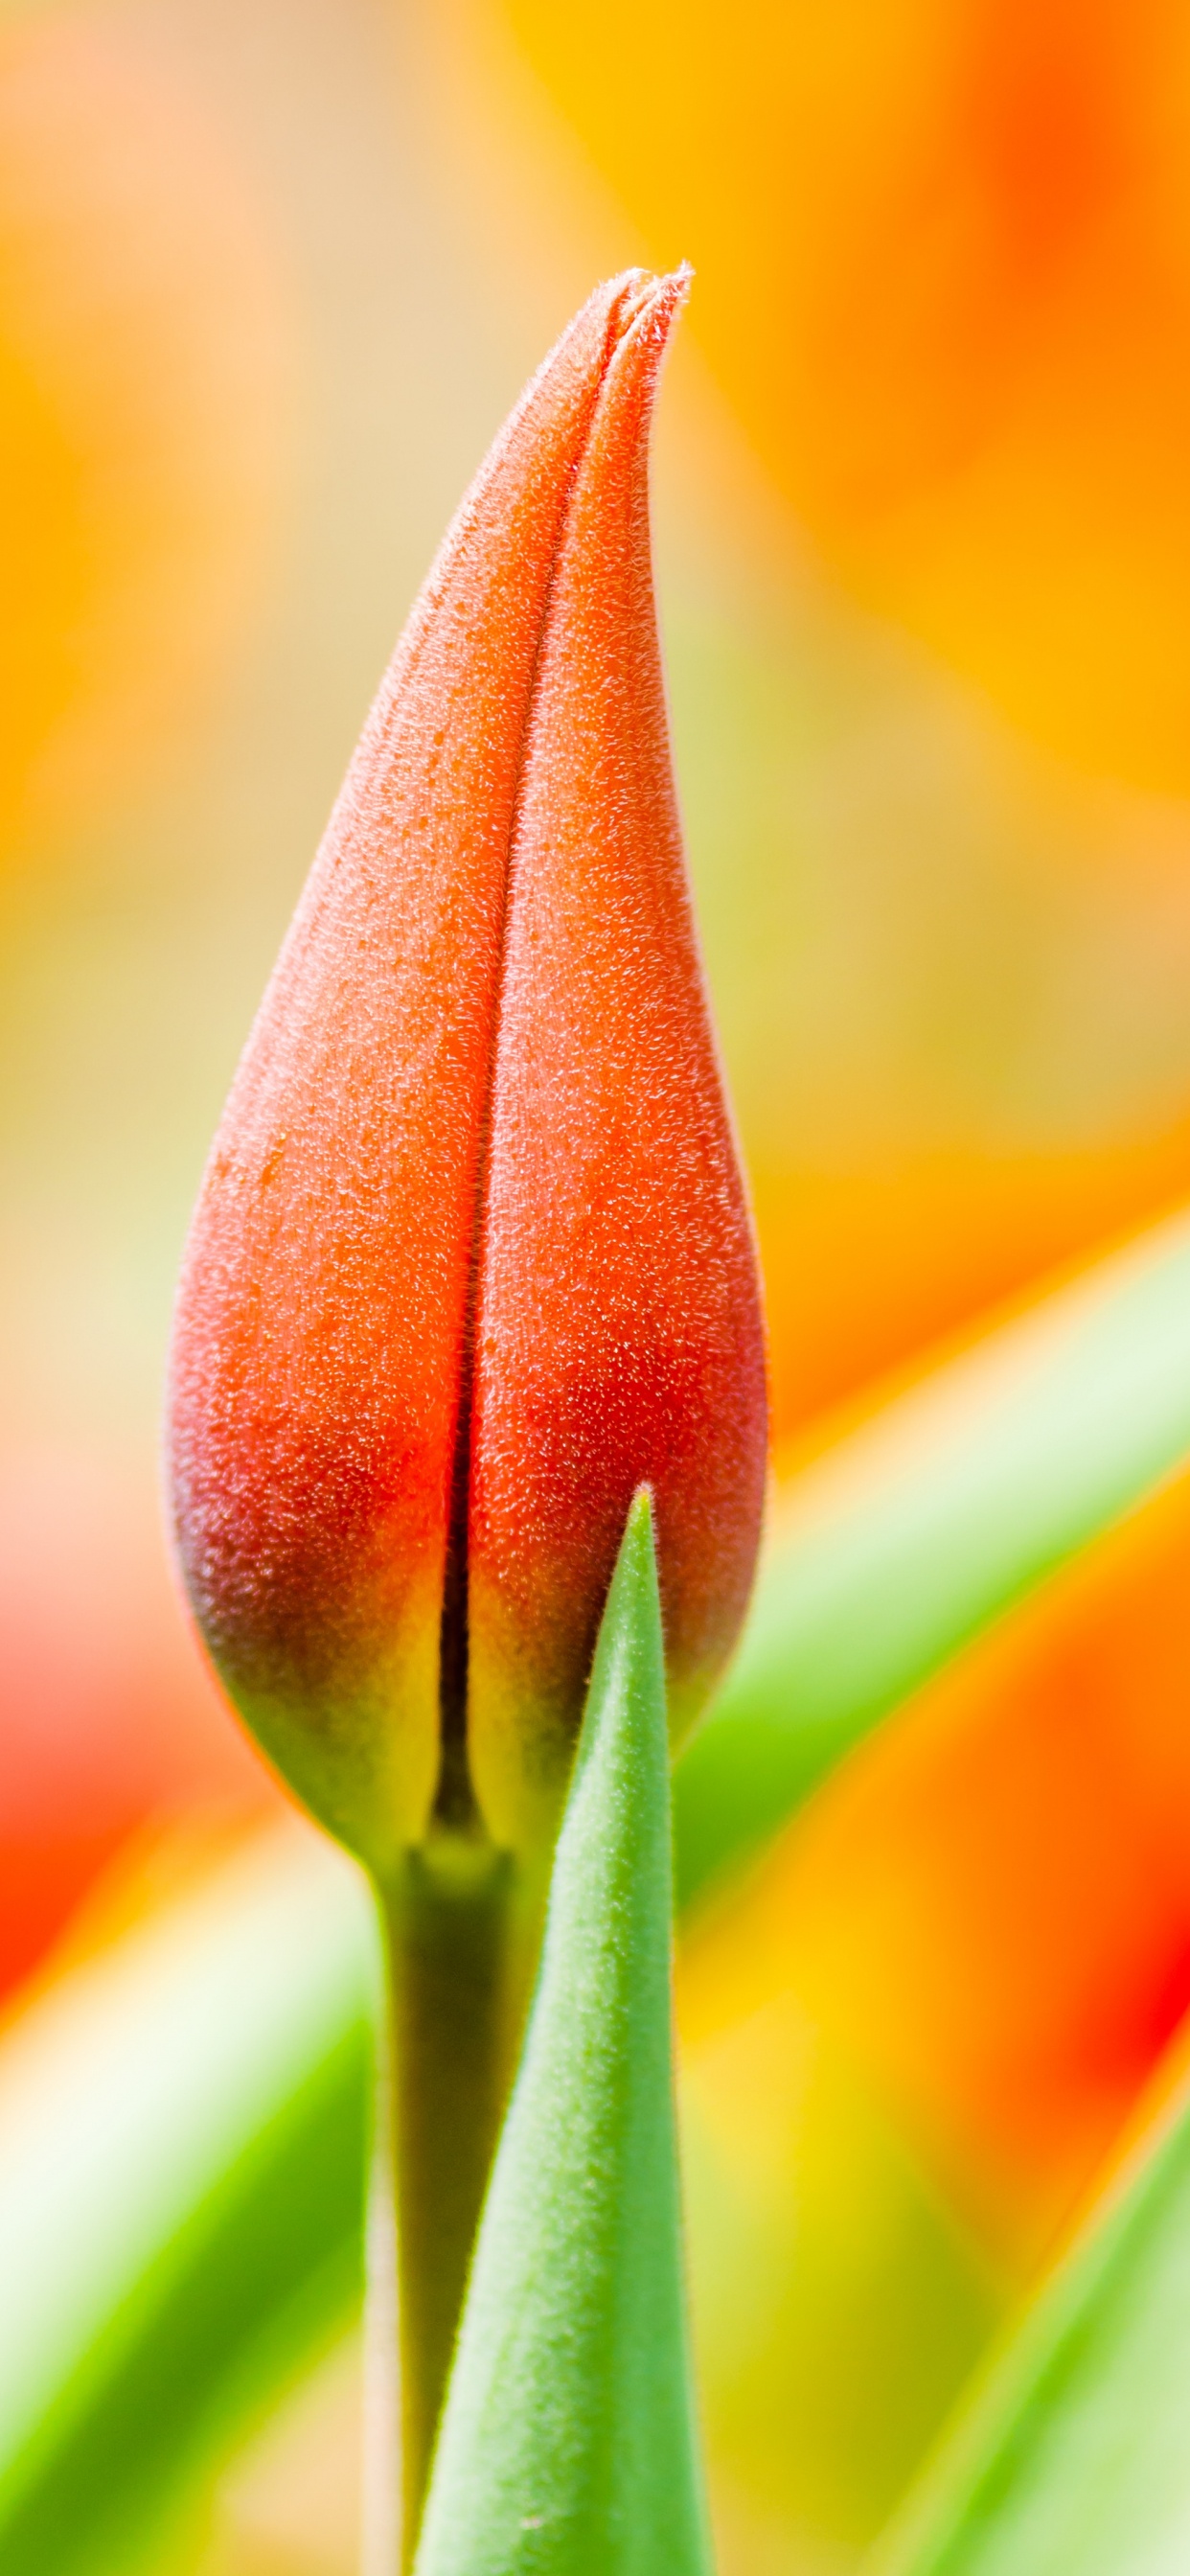 Red and Yellow Tulip in Bloom Close up Photo. Wallpaper in 1242x2688 Resolution